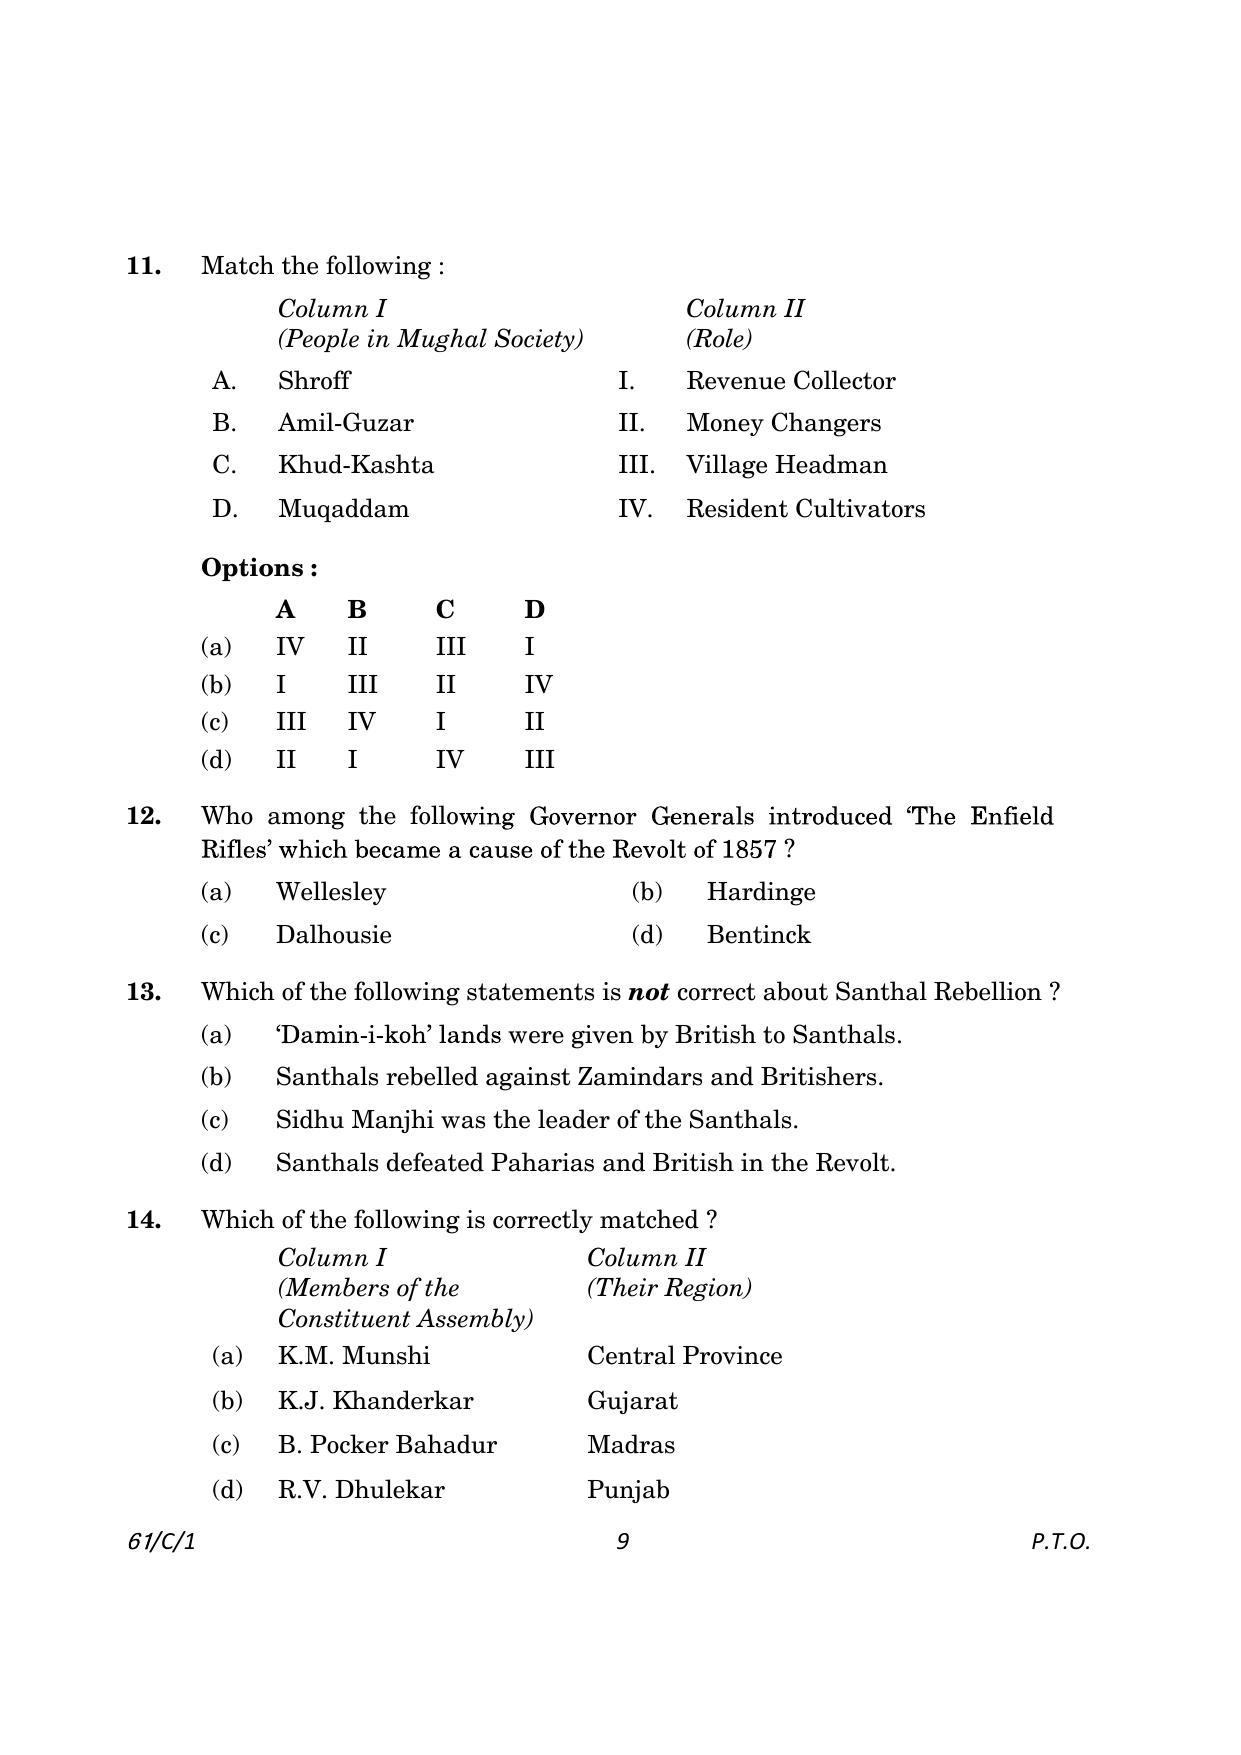 CBSE Class 12 61-1 History 2023 (Compartment) Question Paper - Page 9